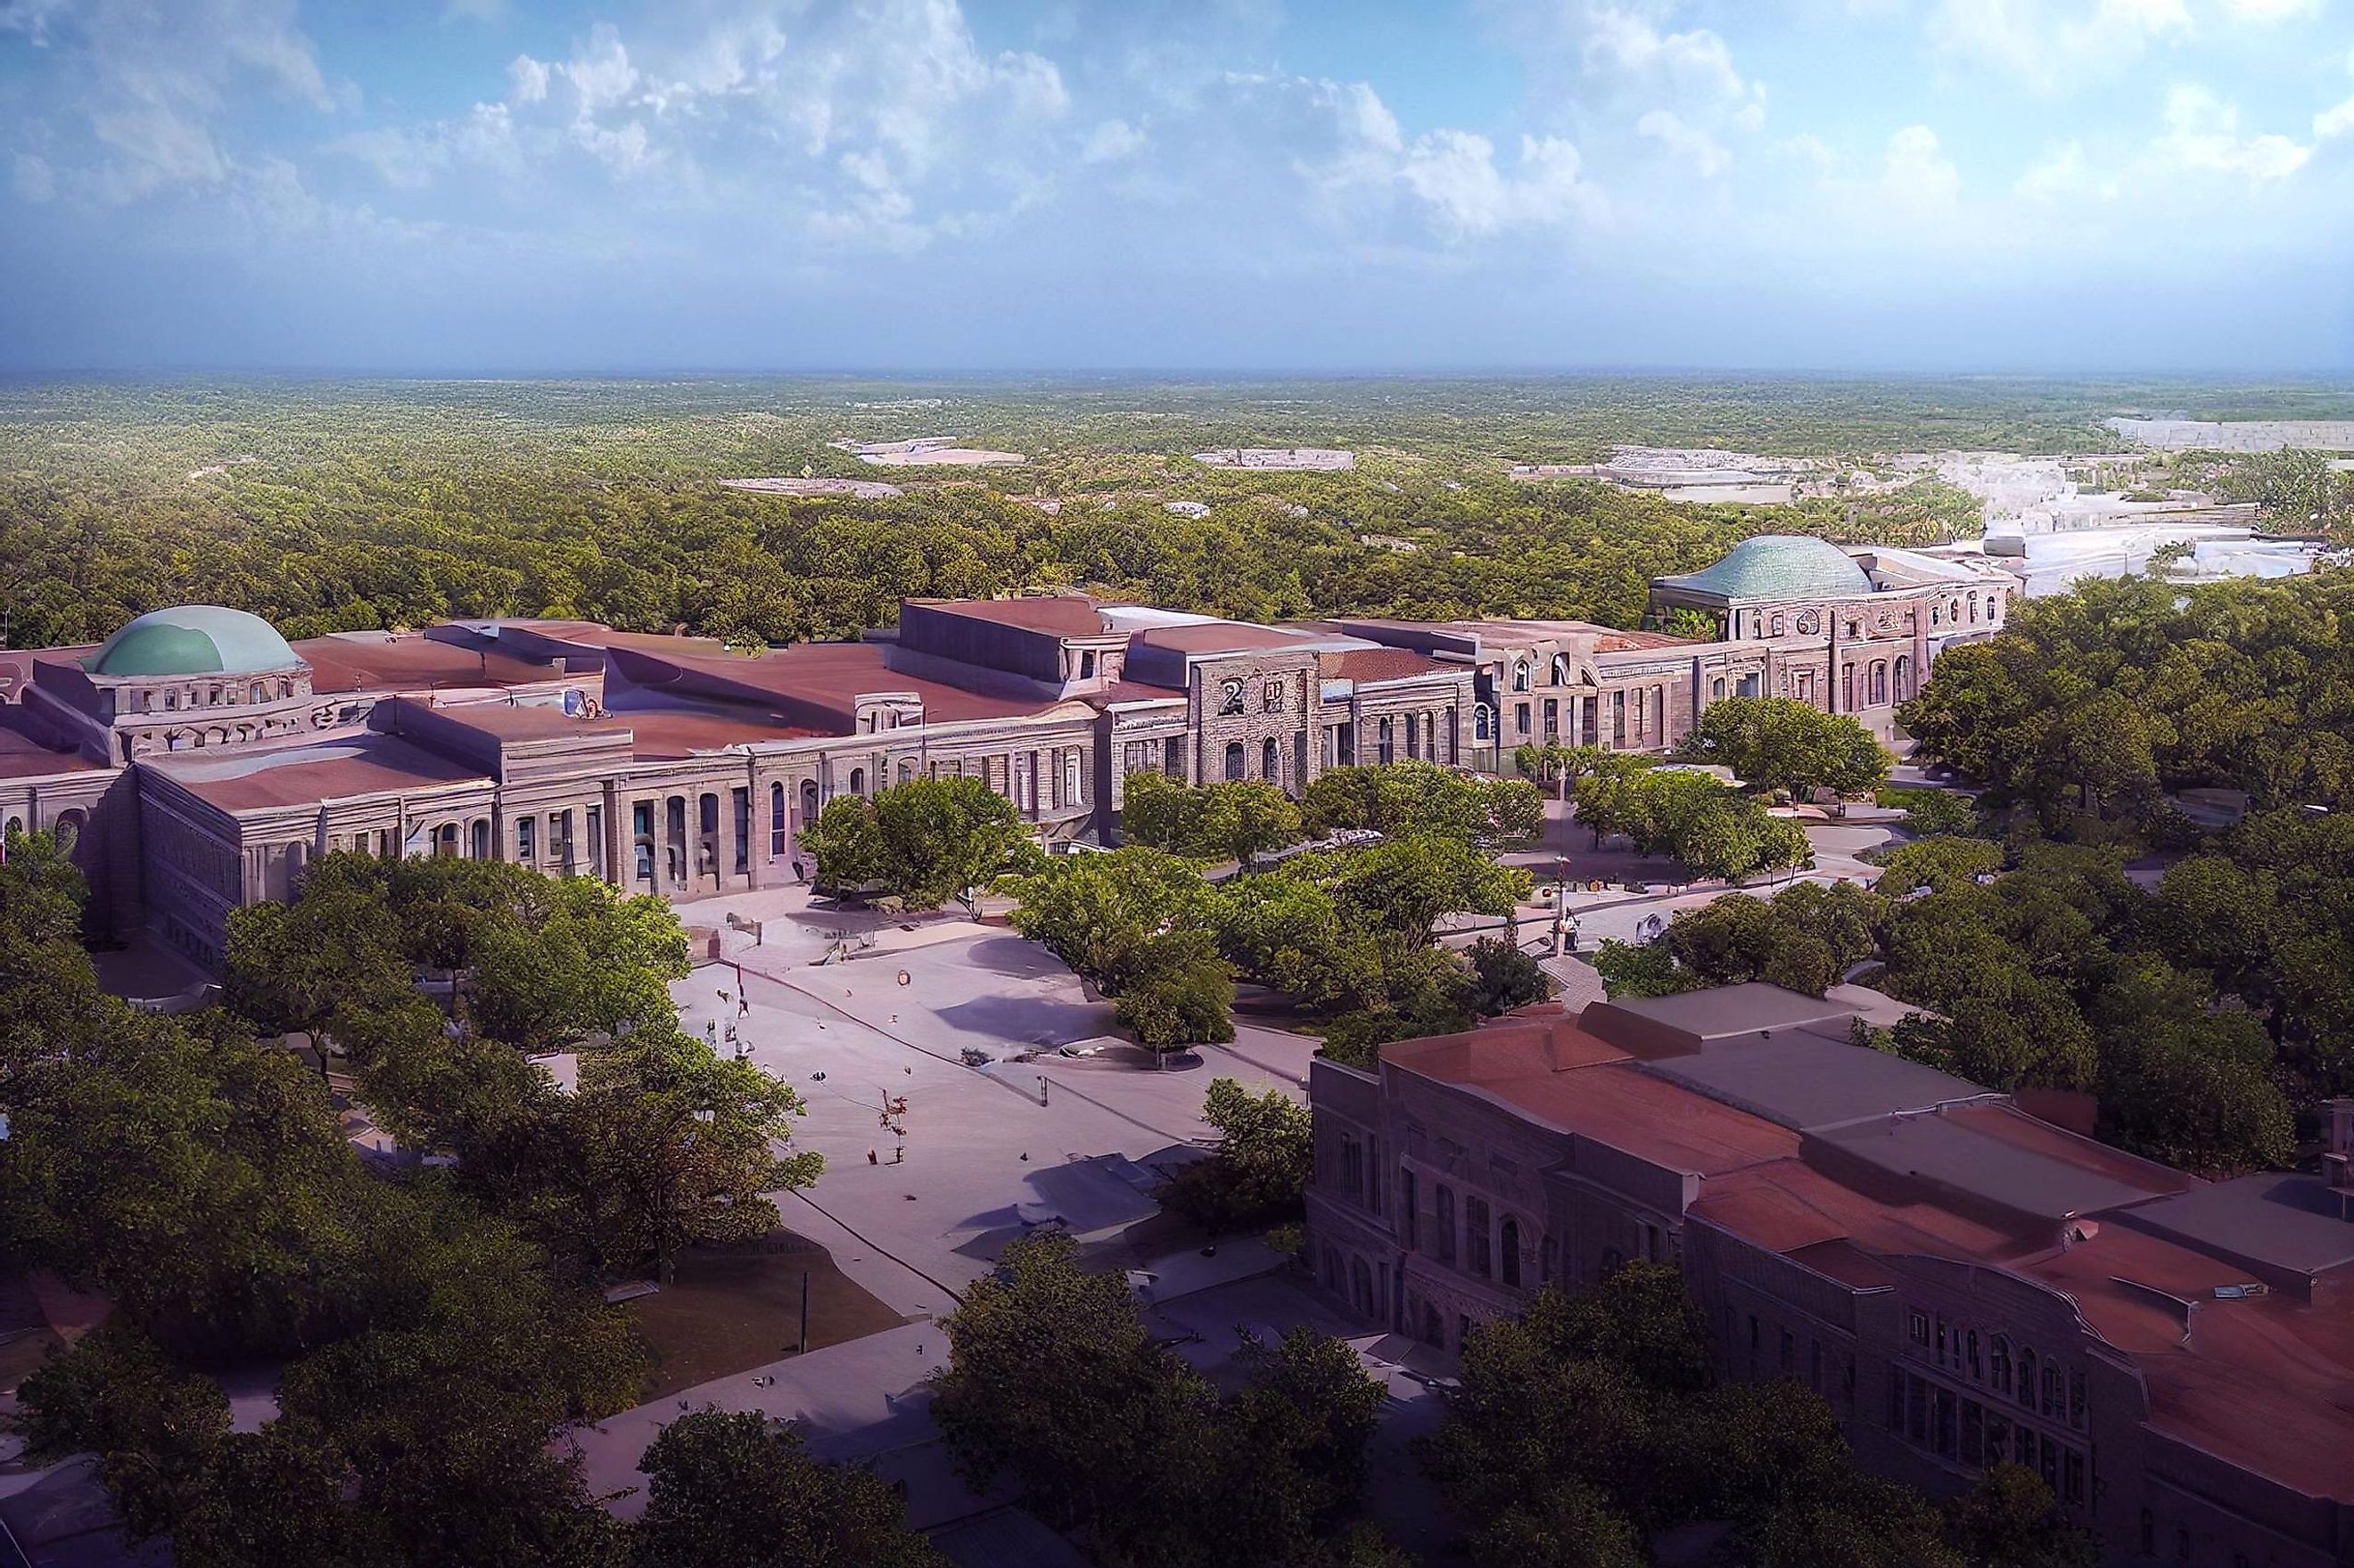 Texas A&M University is a public land-grant research university in College Station, Texas.